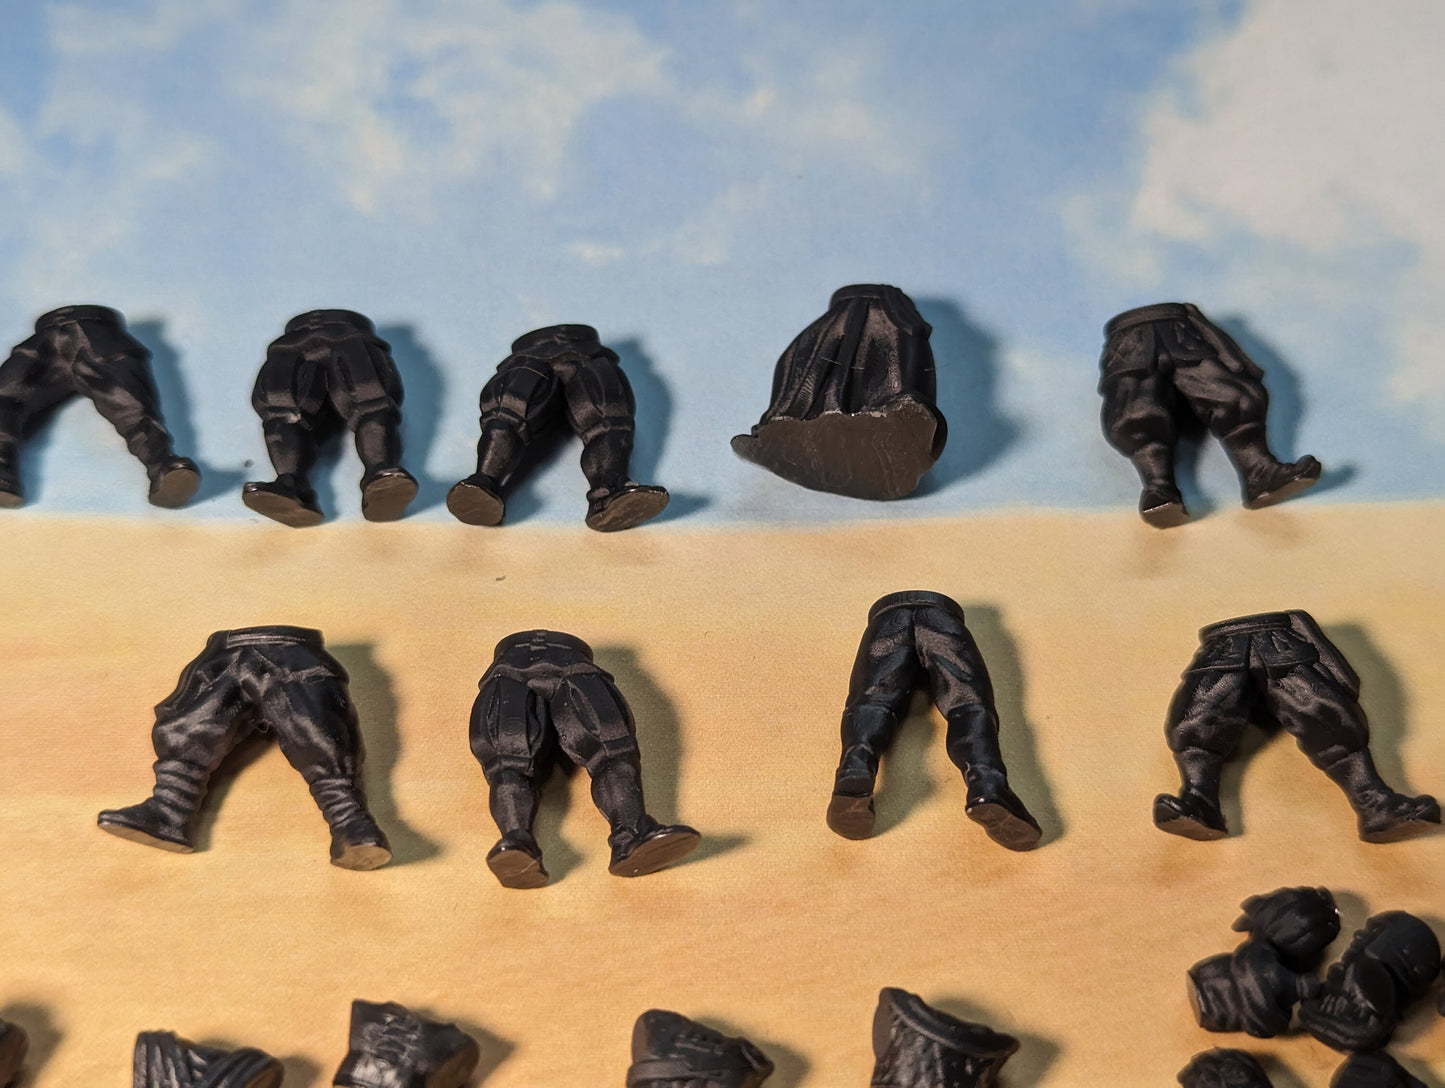 Modular Humans by Brite Minis for Wargames and RPGs 28mm - Lots of Options! Customize your order - Resin Miniatures